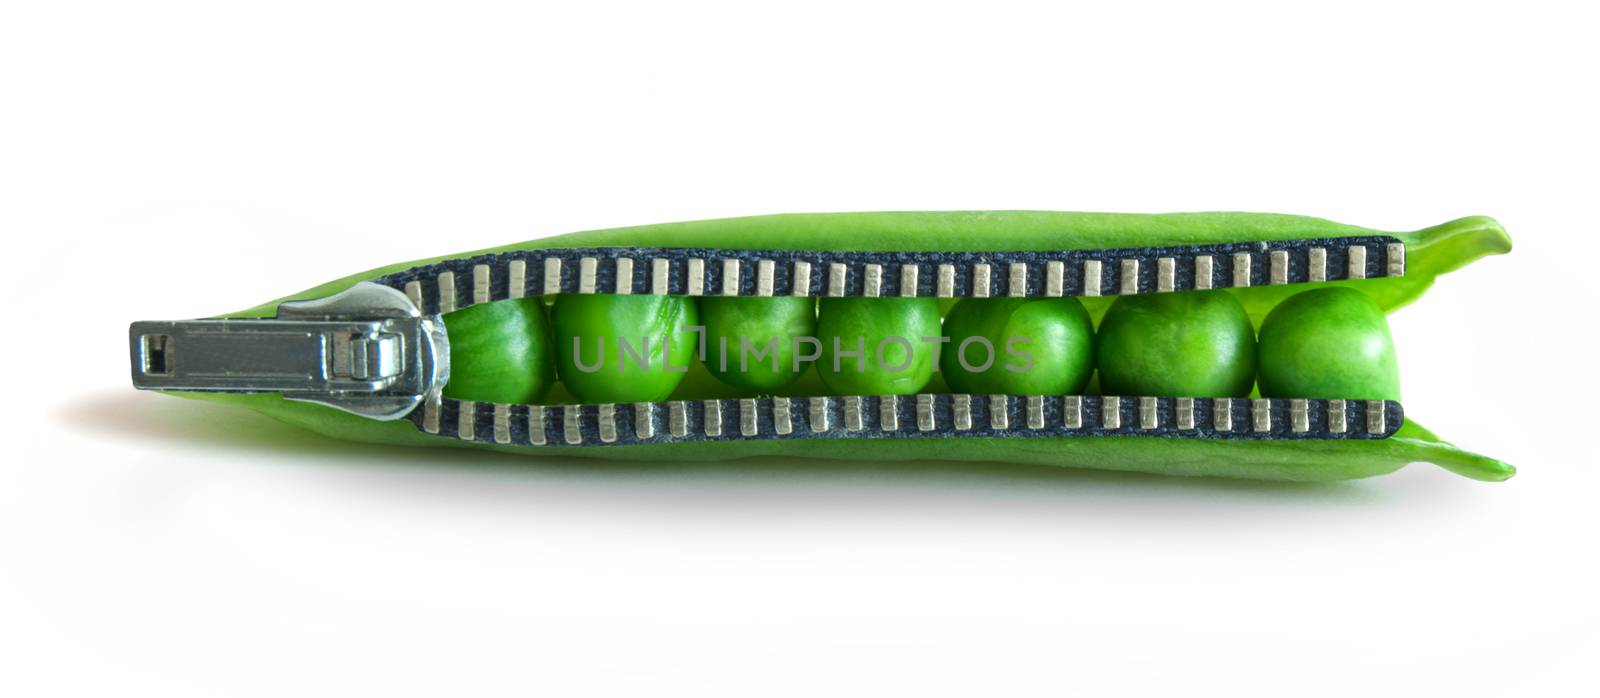 Snap peas pod with zipper over a white background